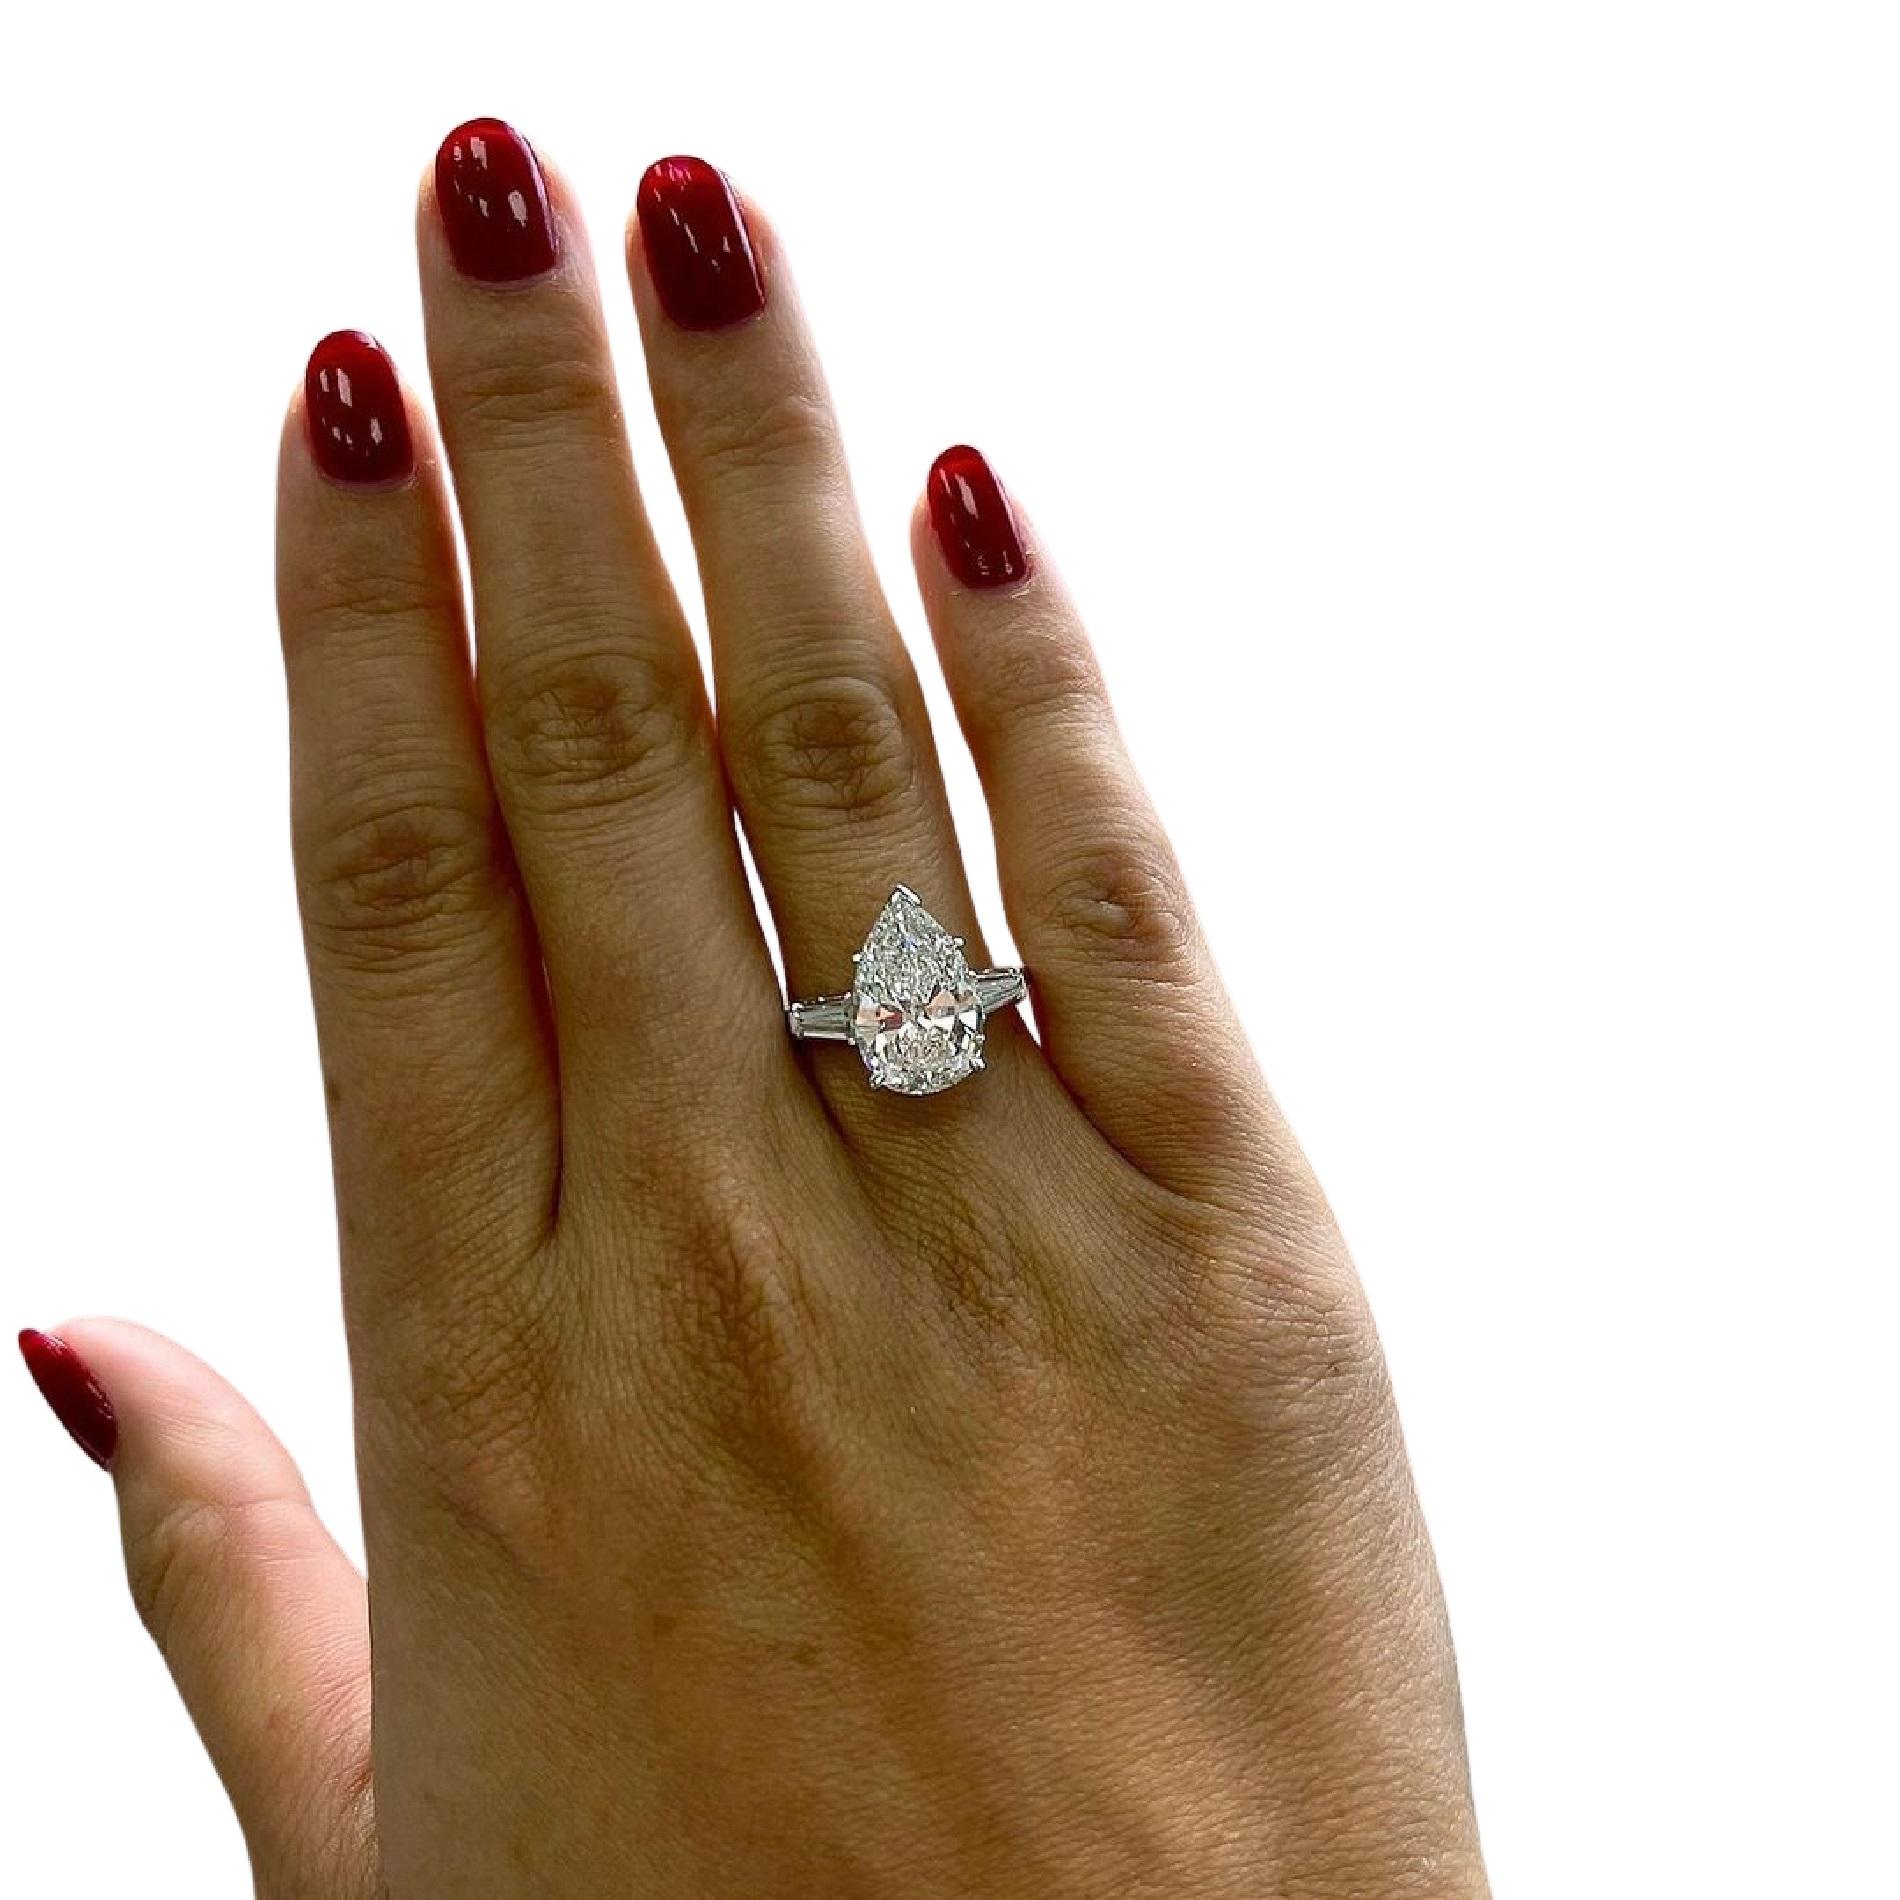 This exquisite ring boasts a magnificent 4-carat pear-cut diamond as its centerpiece, certified by the Gemological Institute of America (GIA) to ensure its exceptional quality and authenticity. The diamond dazzles with a rare D color grade,